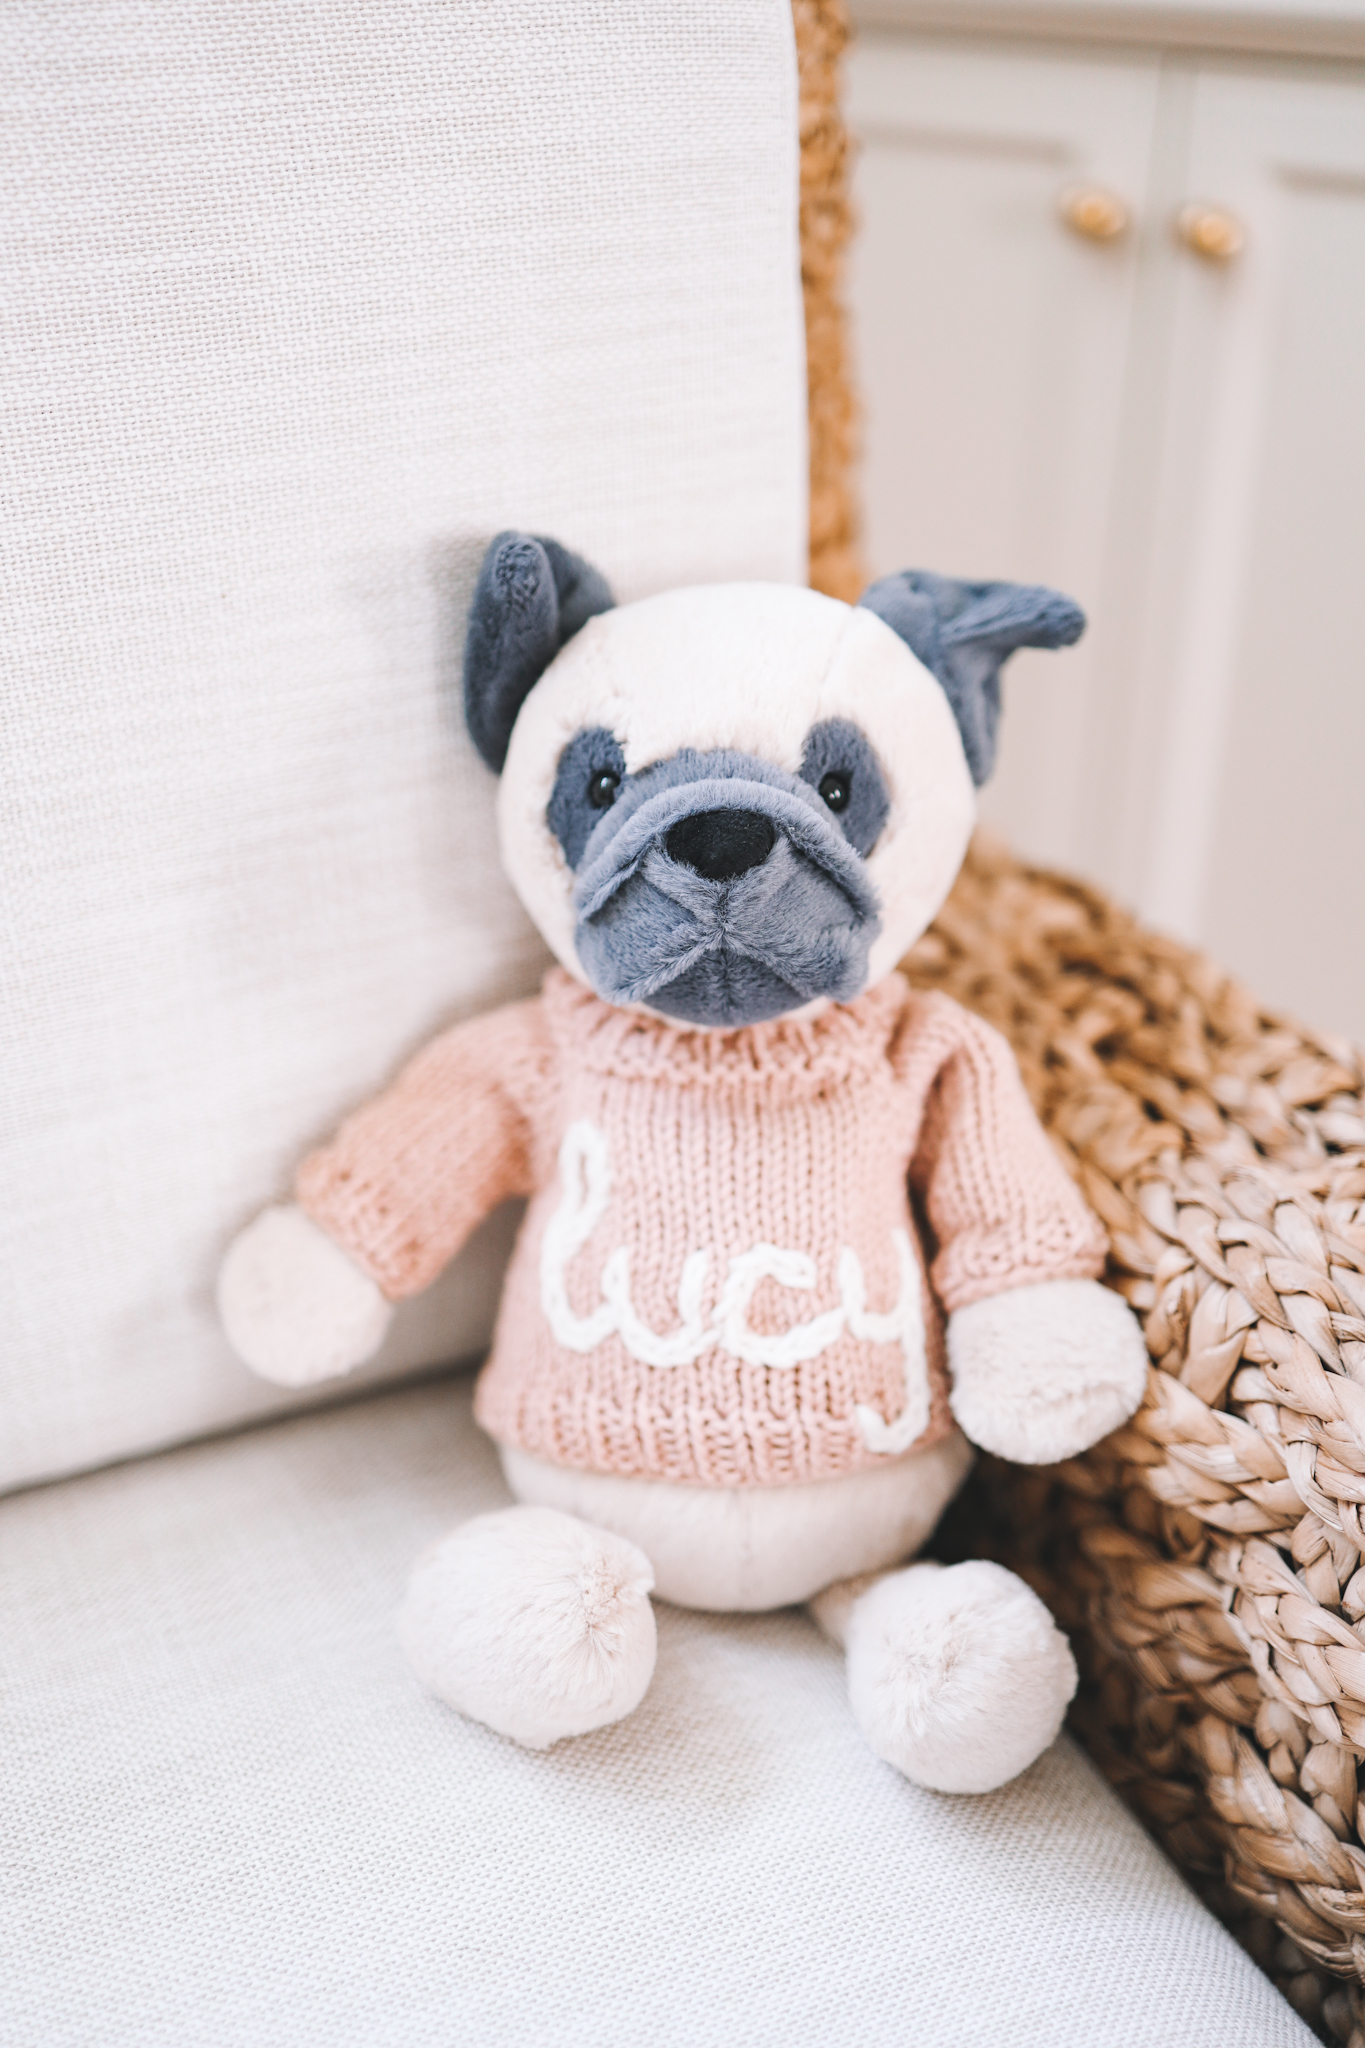 Jellycat Stuffed Animal with clothes